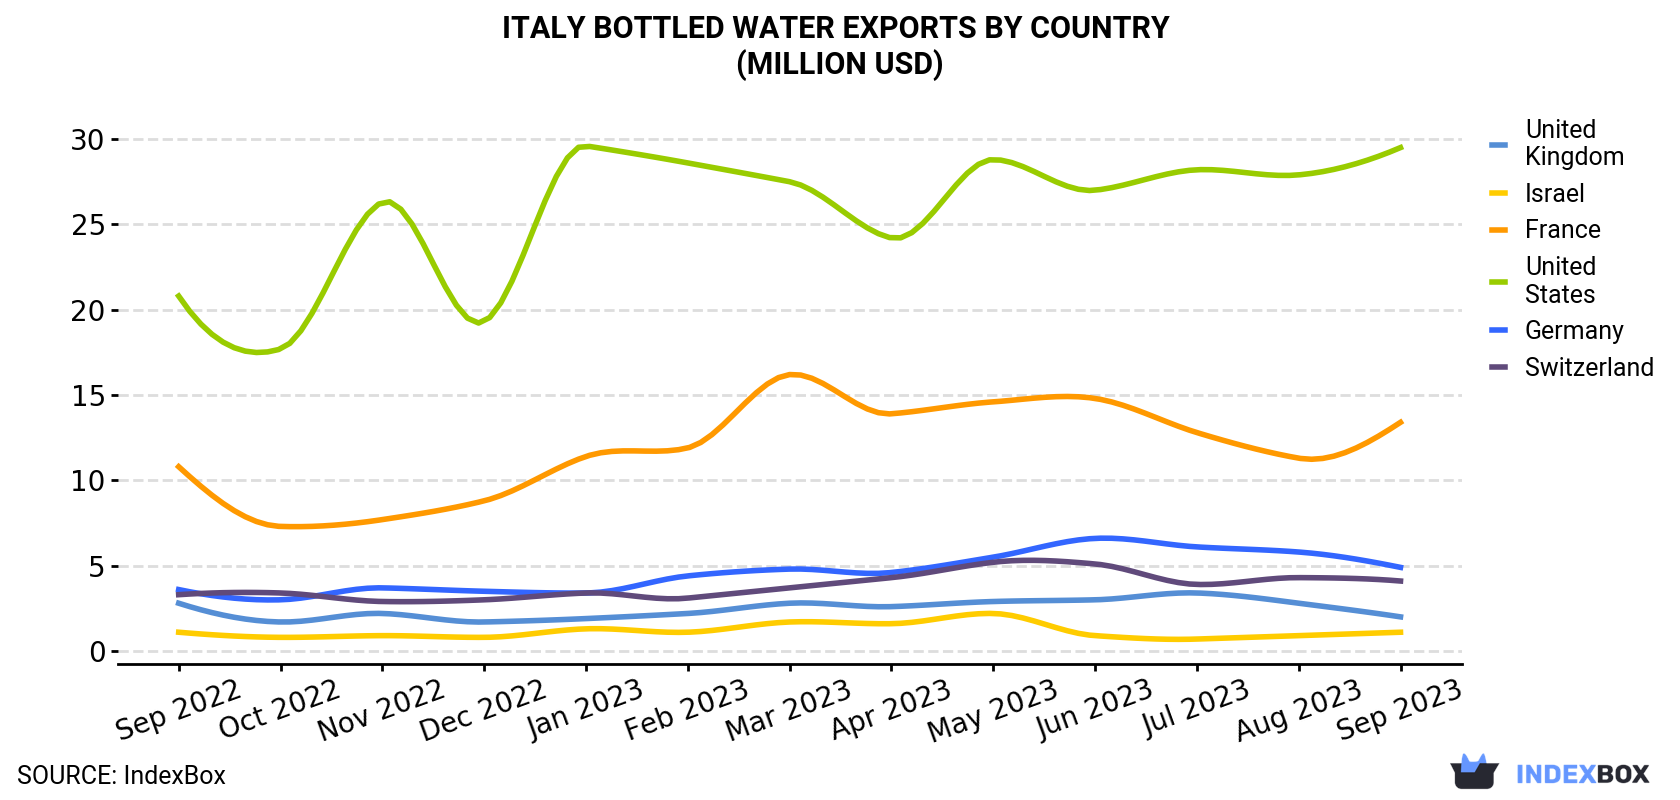 Italy Bottled Water Exports By Country (Million USD)